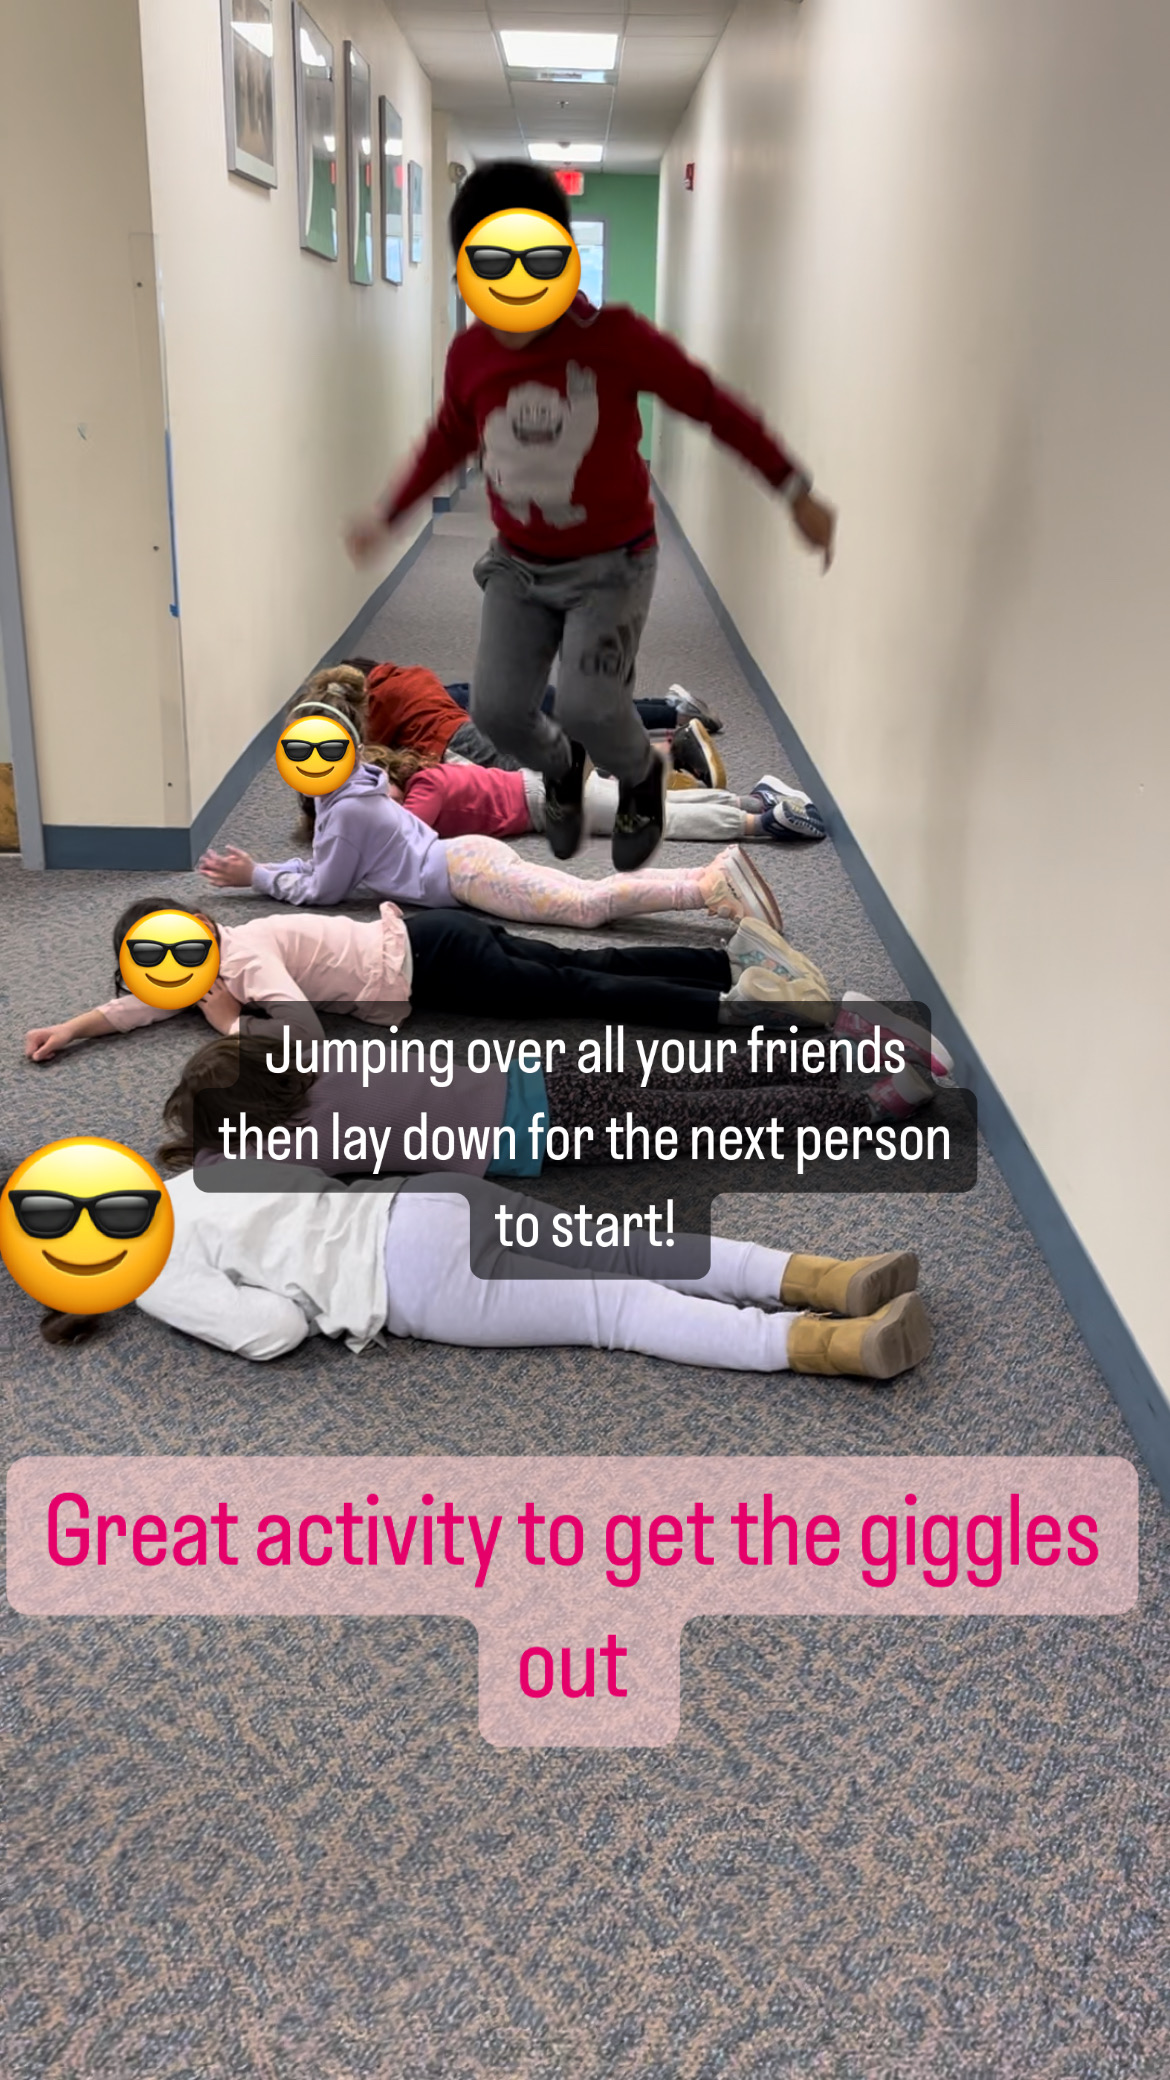 Jumping over friends